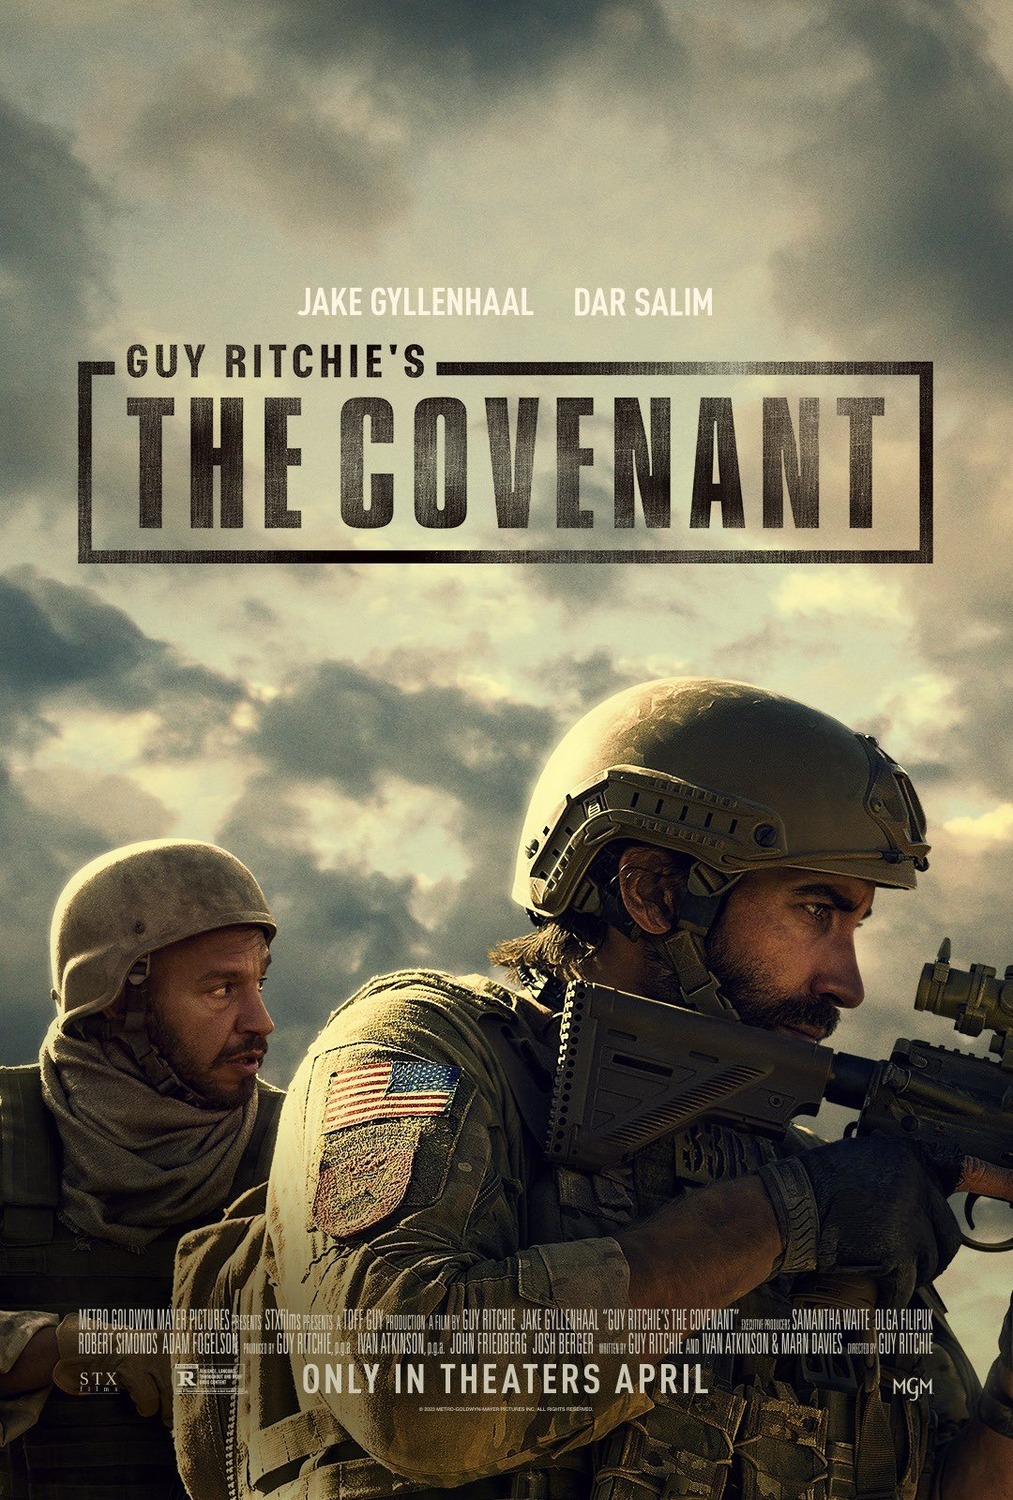 “The Covenant” Trailer